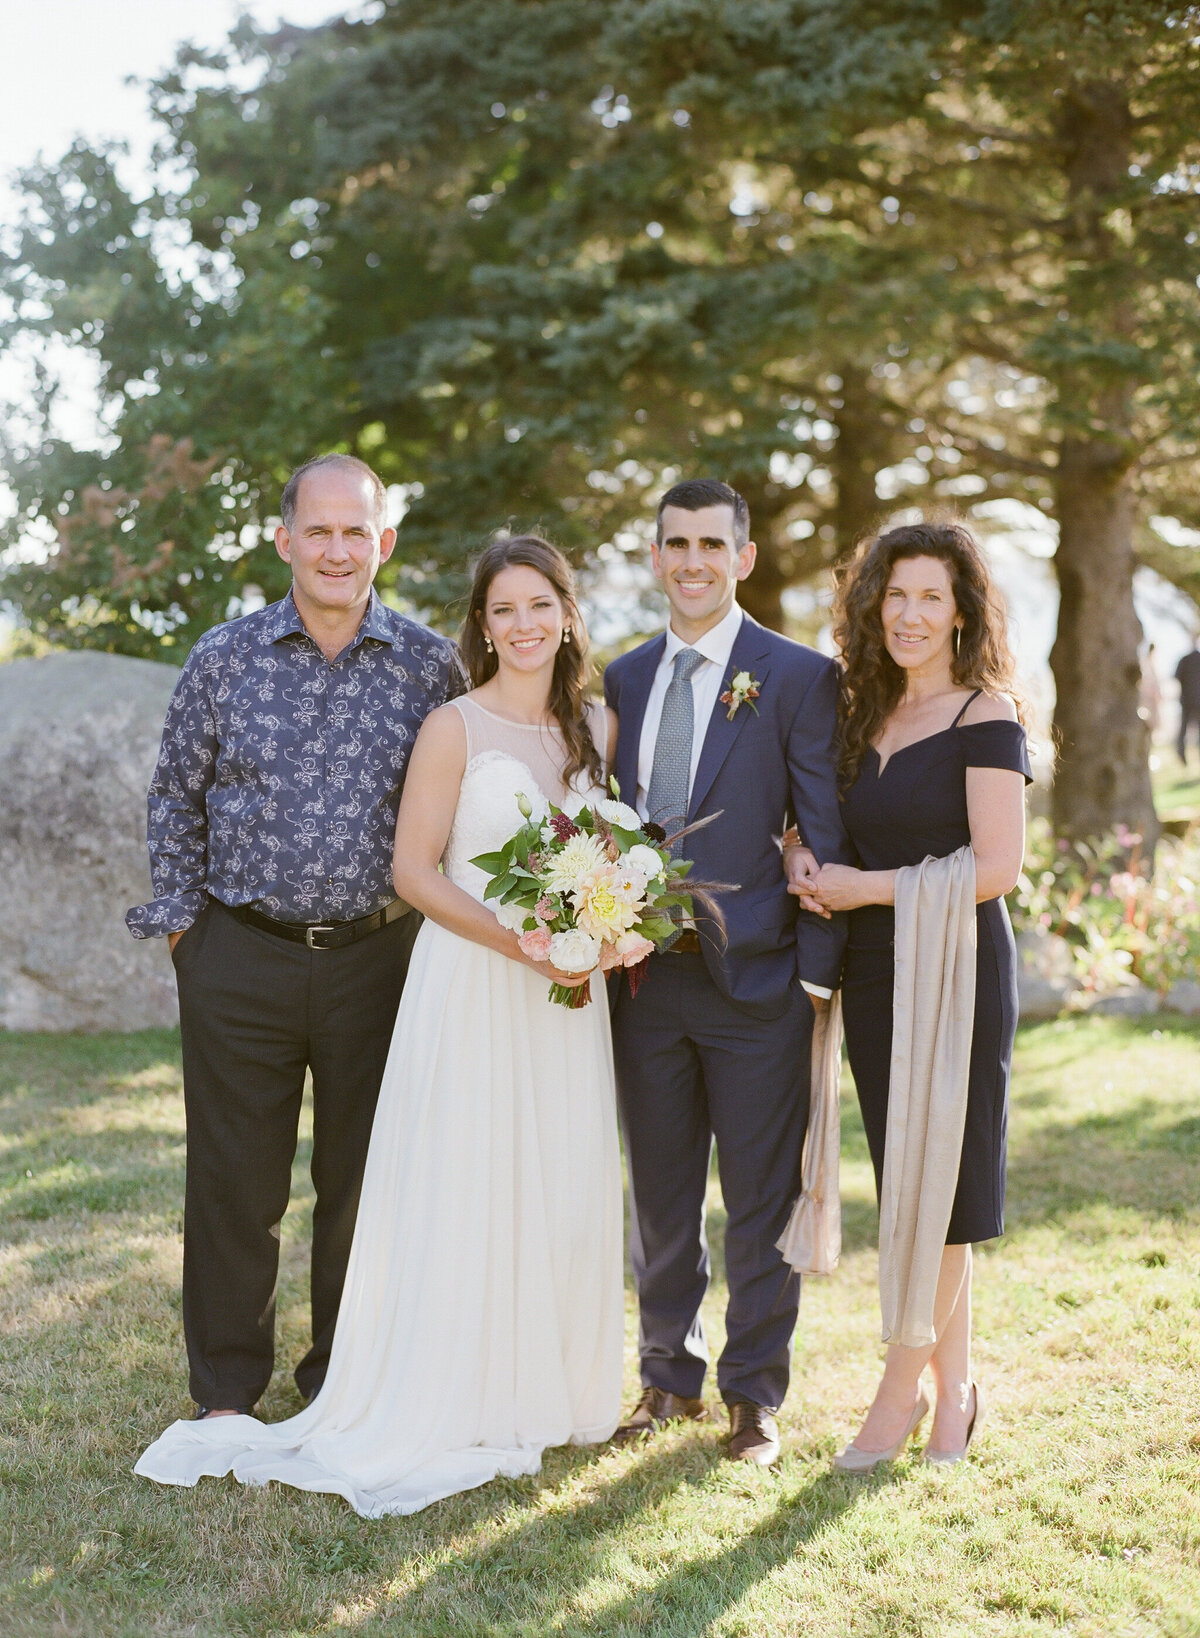 Jacqueline Anne Photography - Halifax Wedding Photographer - Jaclyn and Morgan-53